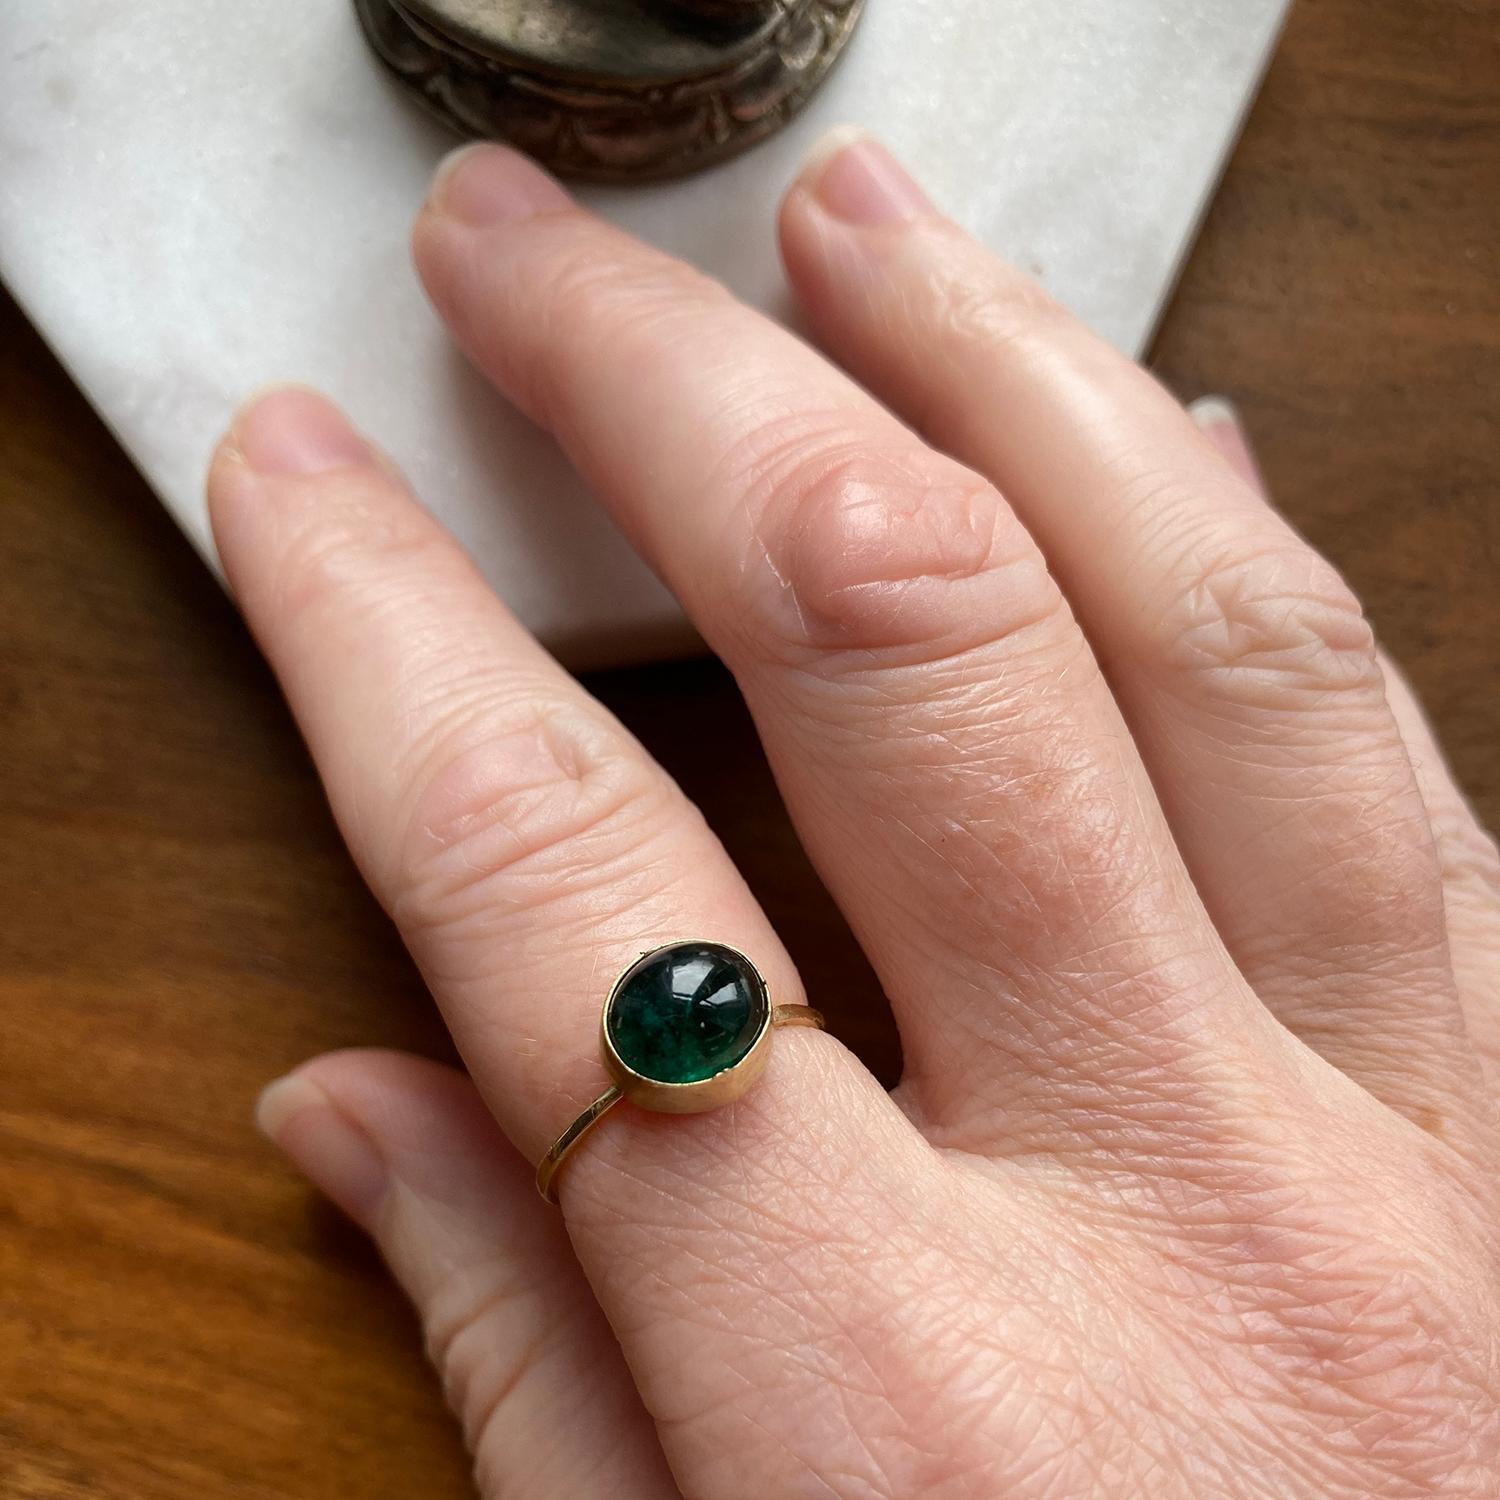 18 Karat Yellow Gold Love Knot Ring by Deborah Murdoch featuring a unique oval Green Emerald Cabochon Stone. The ring band has an organic knot giving the option of showing the emerald stone or the knot at the front.

Metal: 18 Karat Yellow